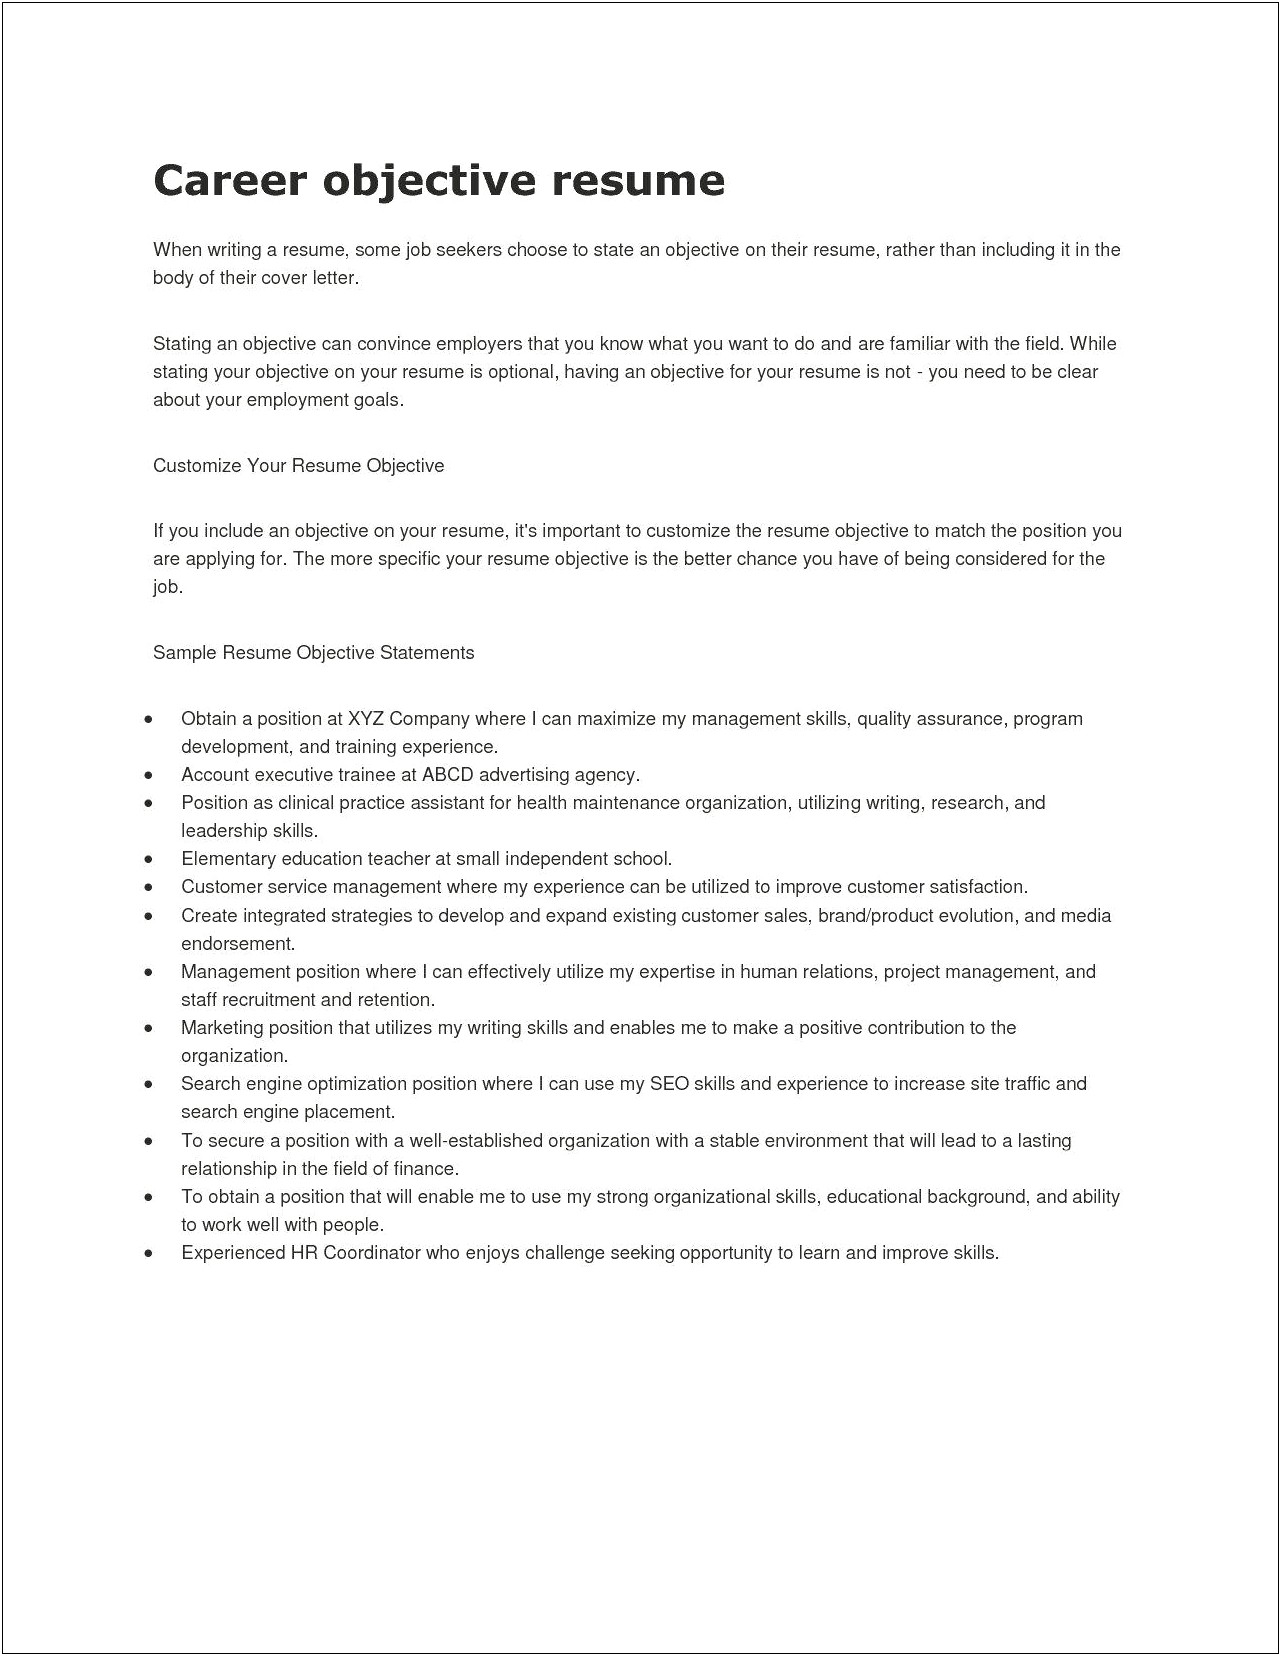 Resume Objective Examples For Job Fair